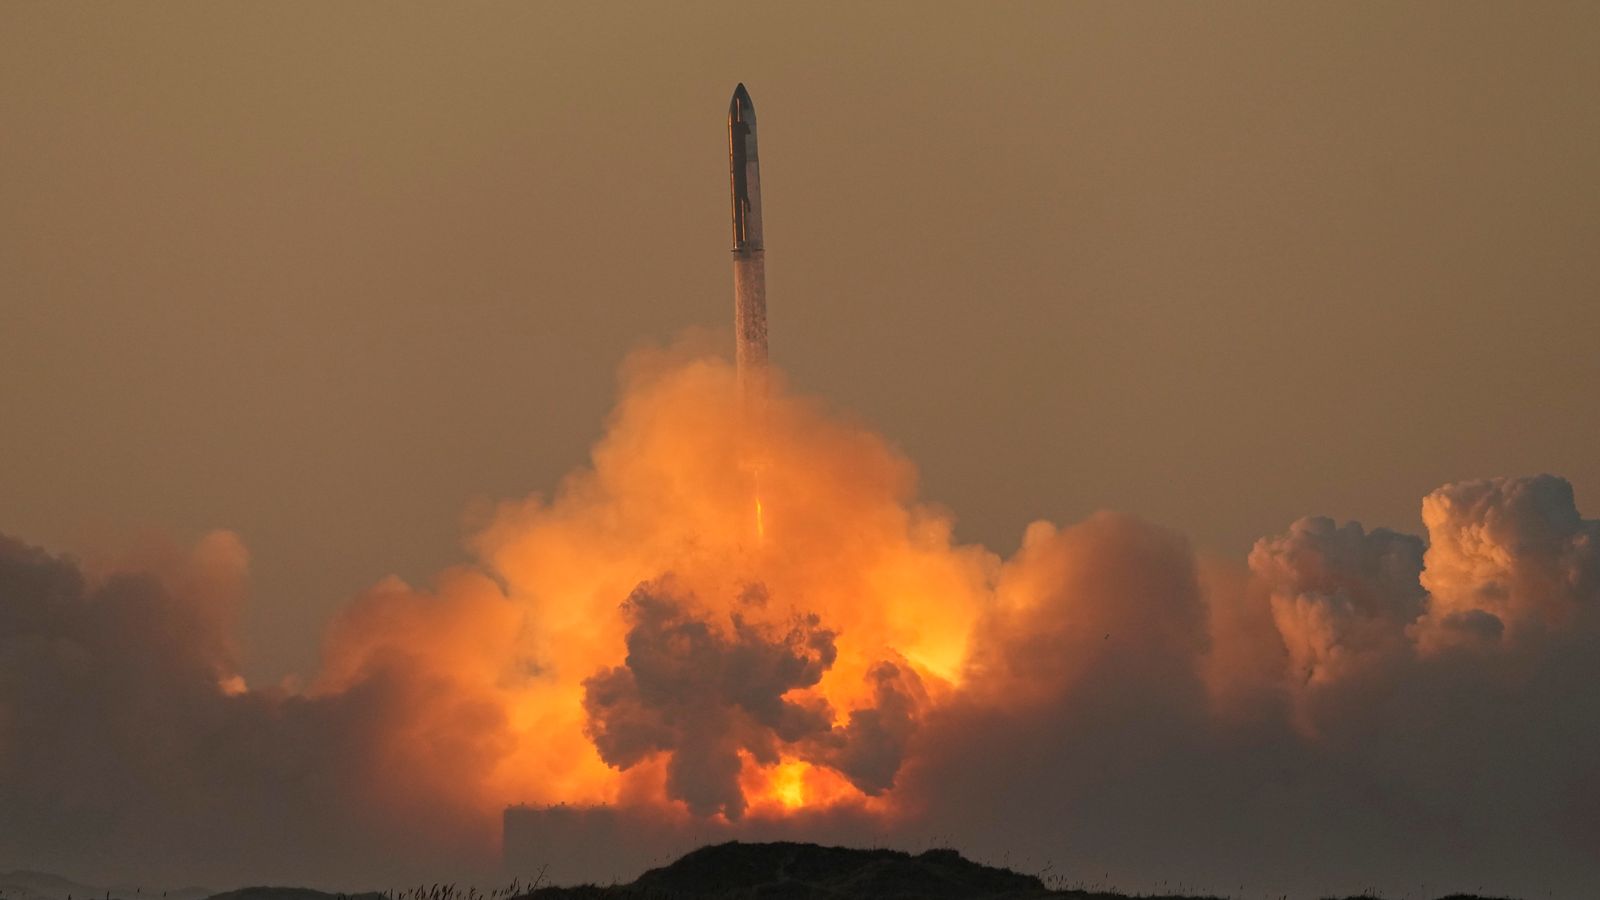 SpaceX loses contact with Starship mega rocket after explosion during second test flight